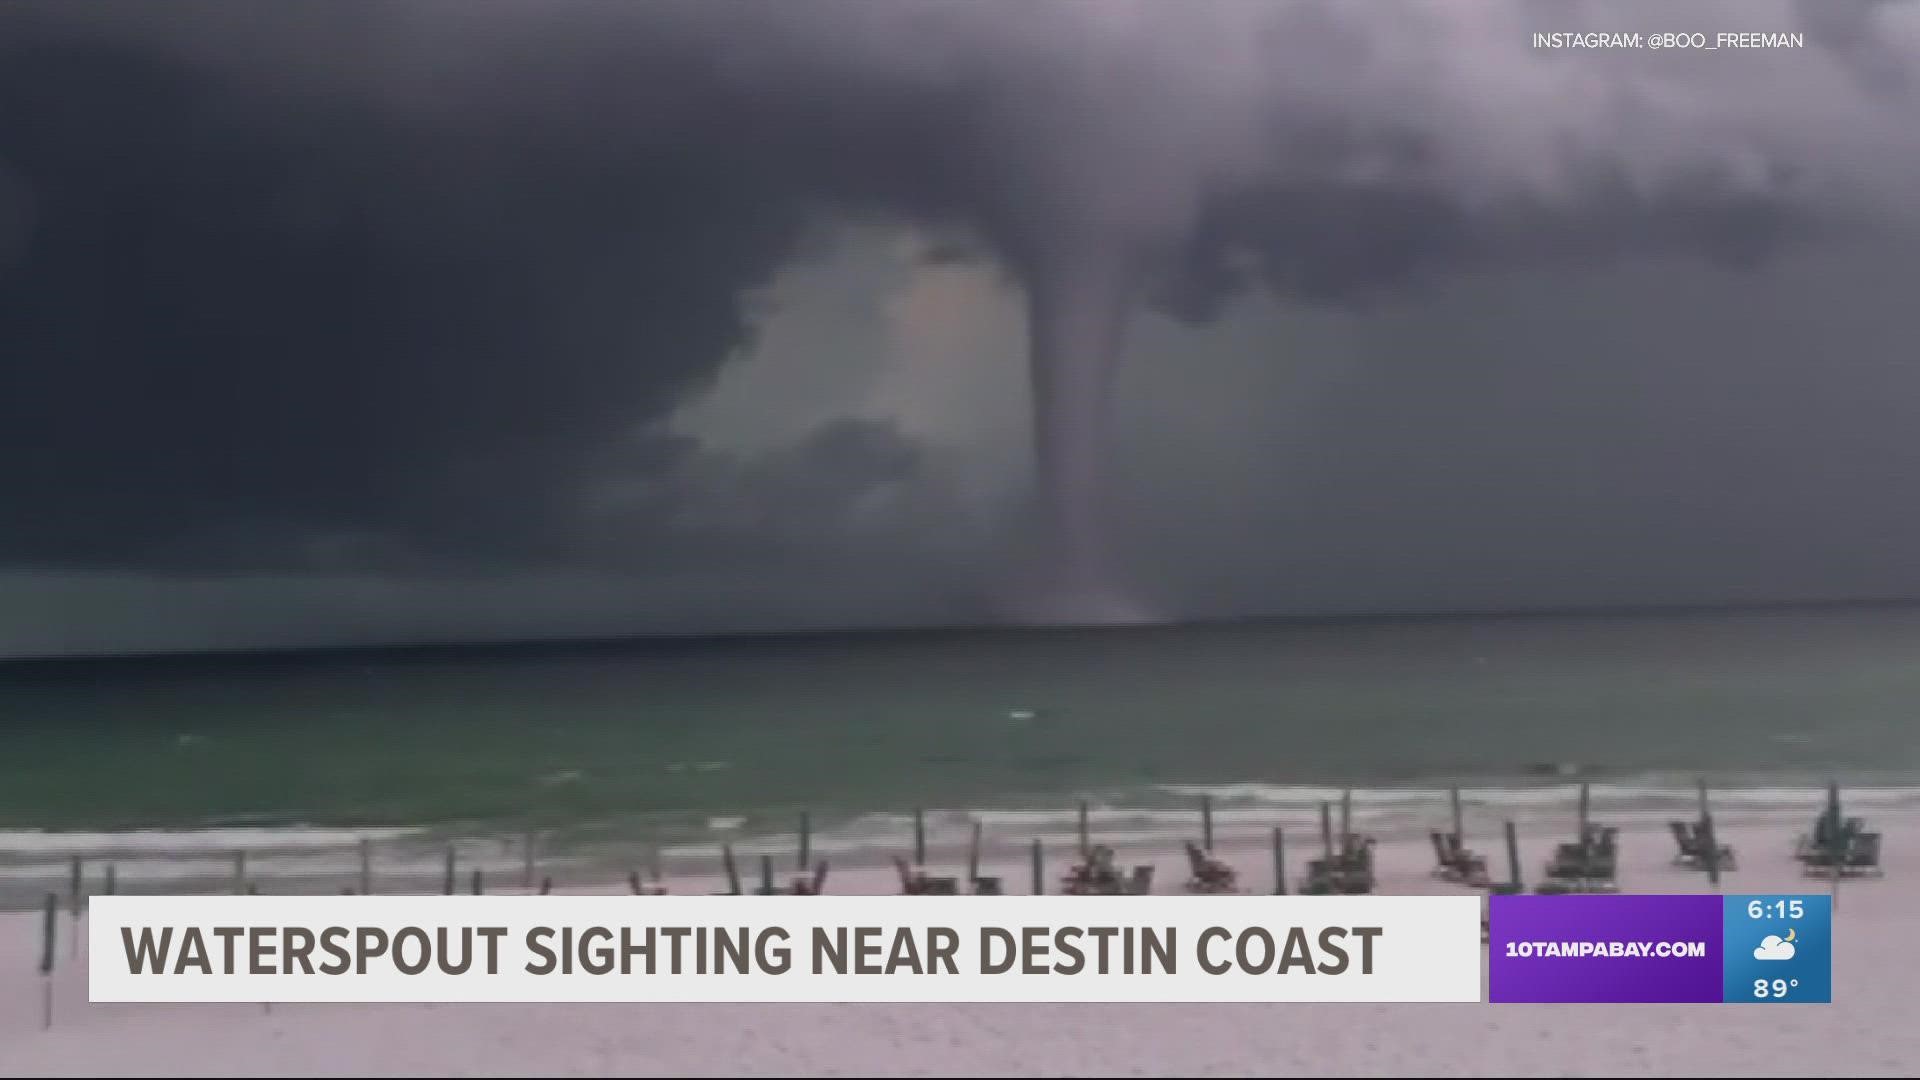 The waterspout did not move onshore.